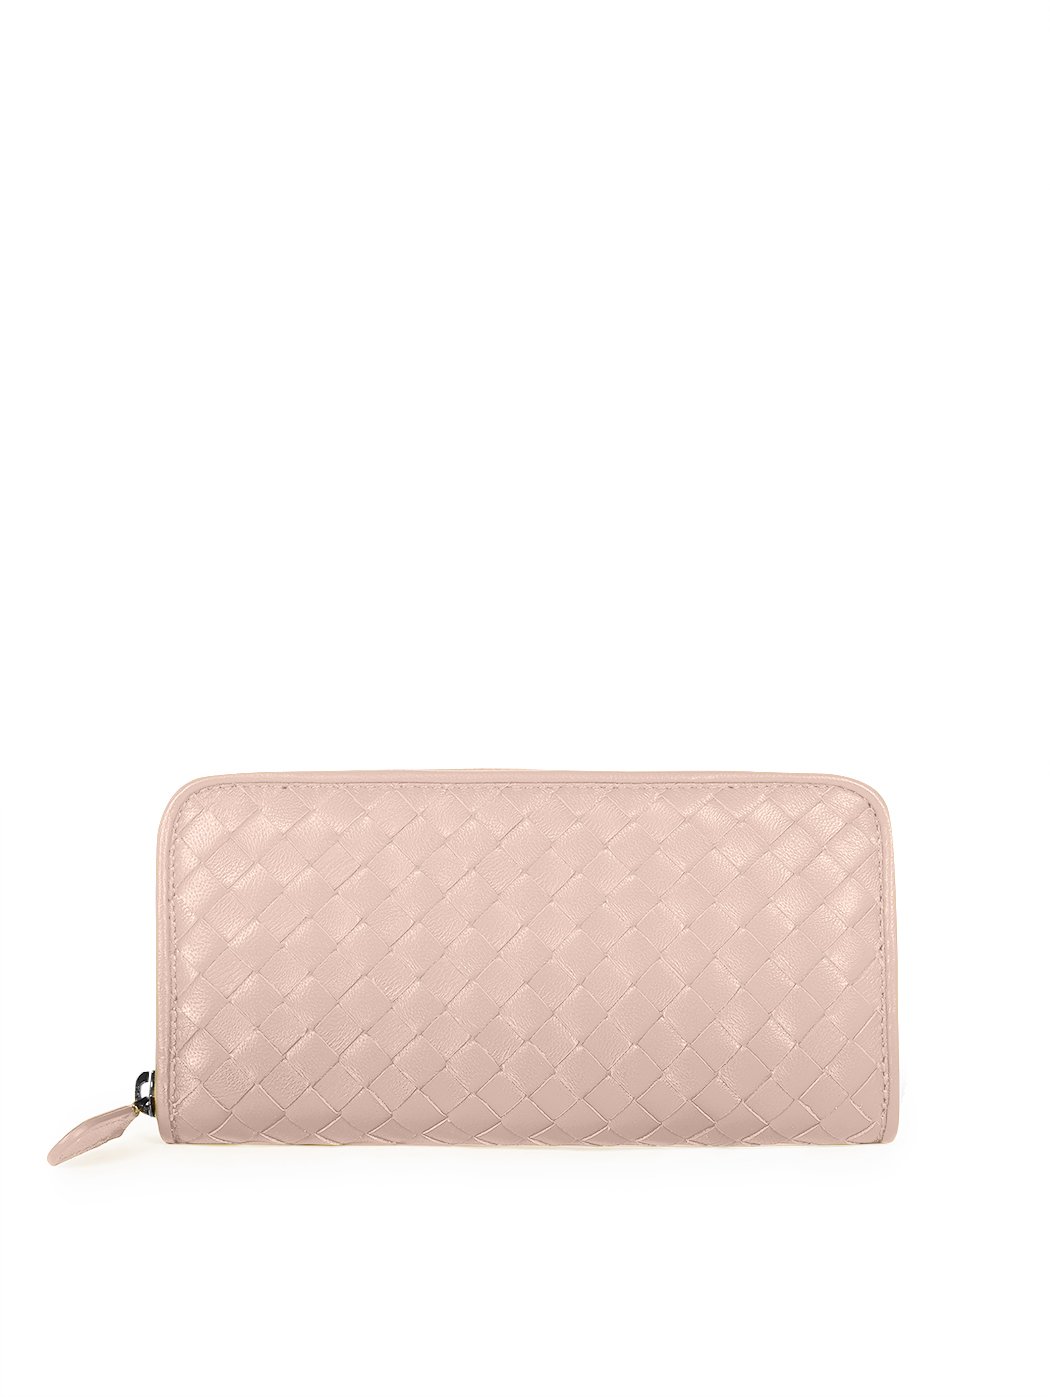 Long zip-around wallet in pink woven leather